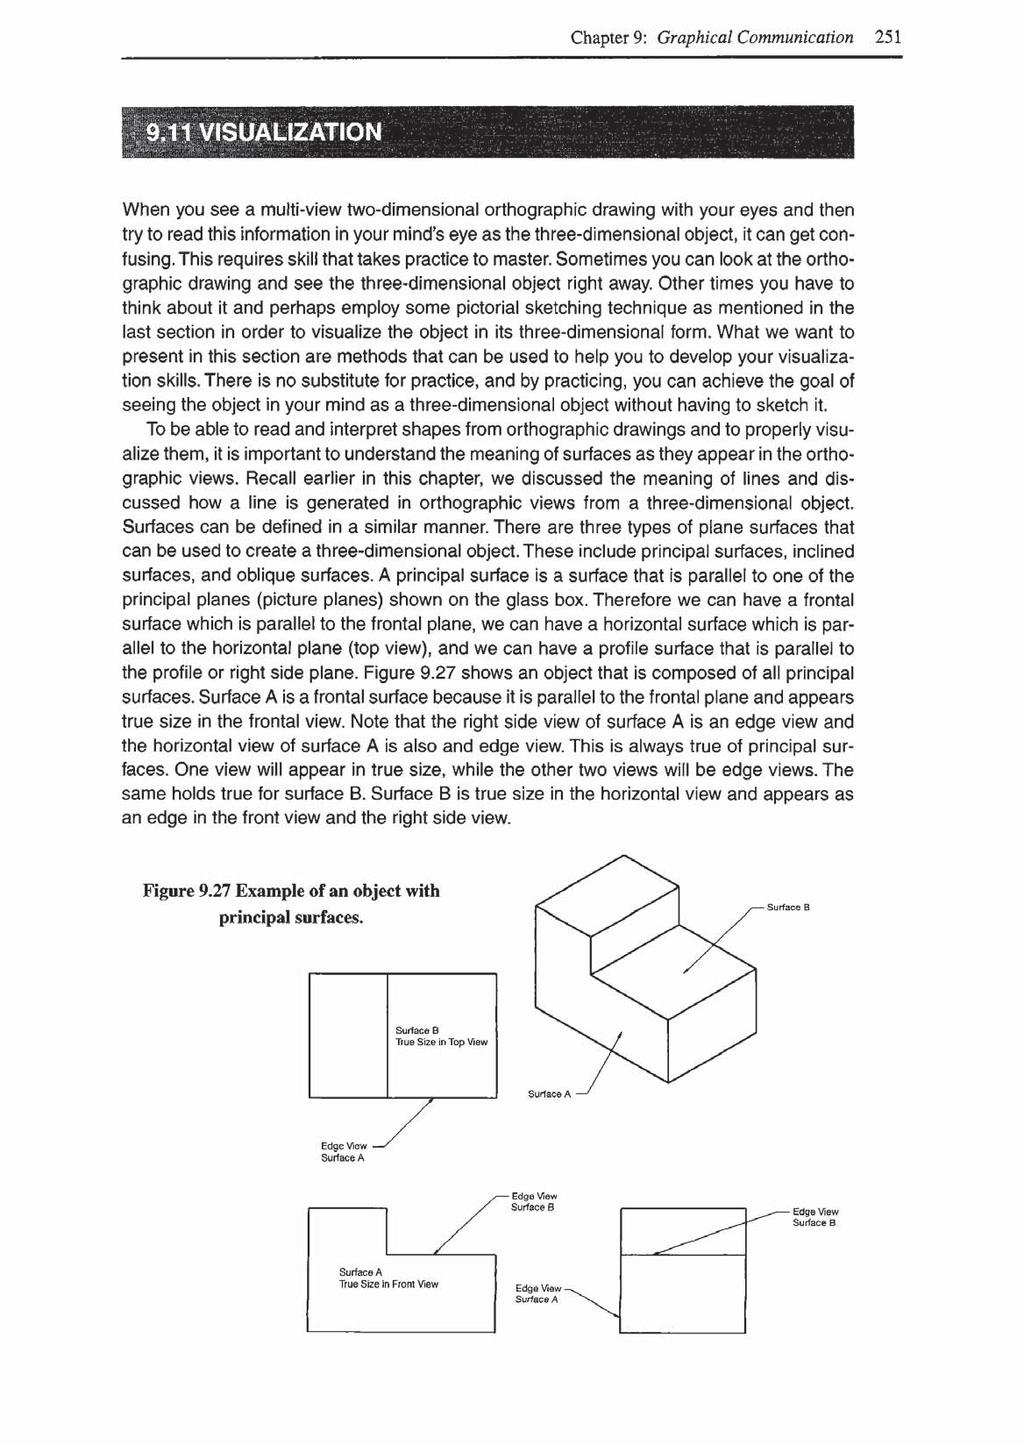 Chapter 9: Graphical Communication 251 1 VISUALIZATION When you see a multi-view two-dimensional orthographic drawing with your eyes and then try to read this information in your mind s eye as the